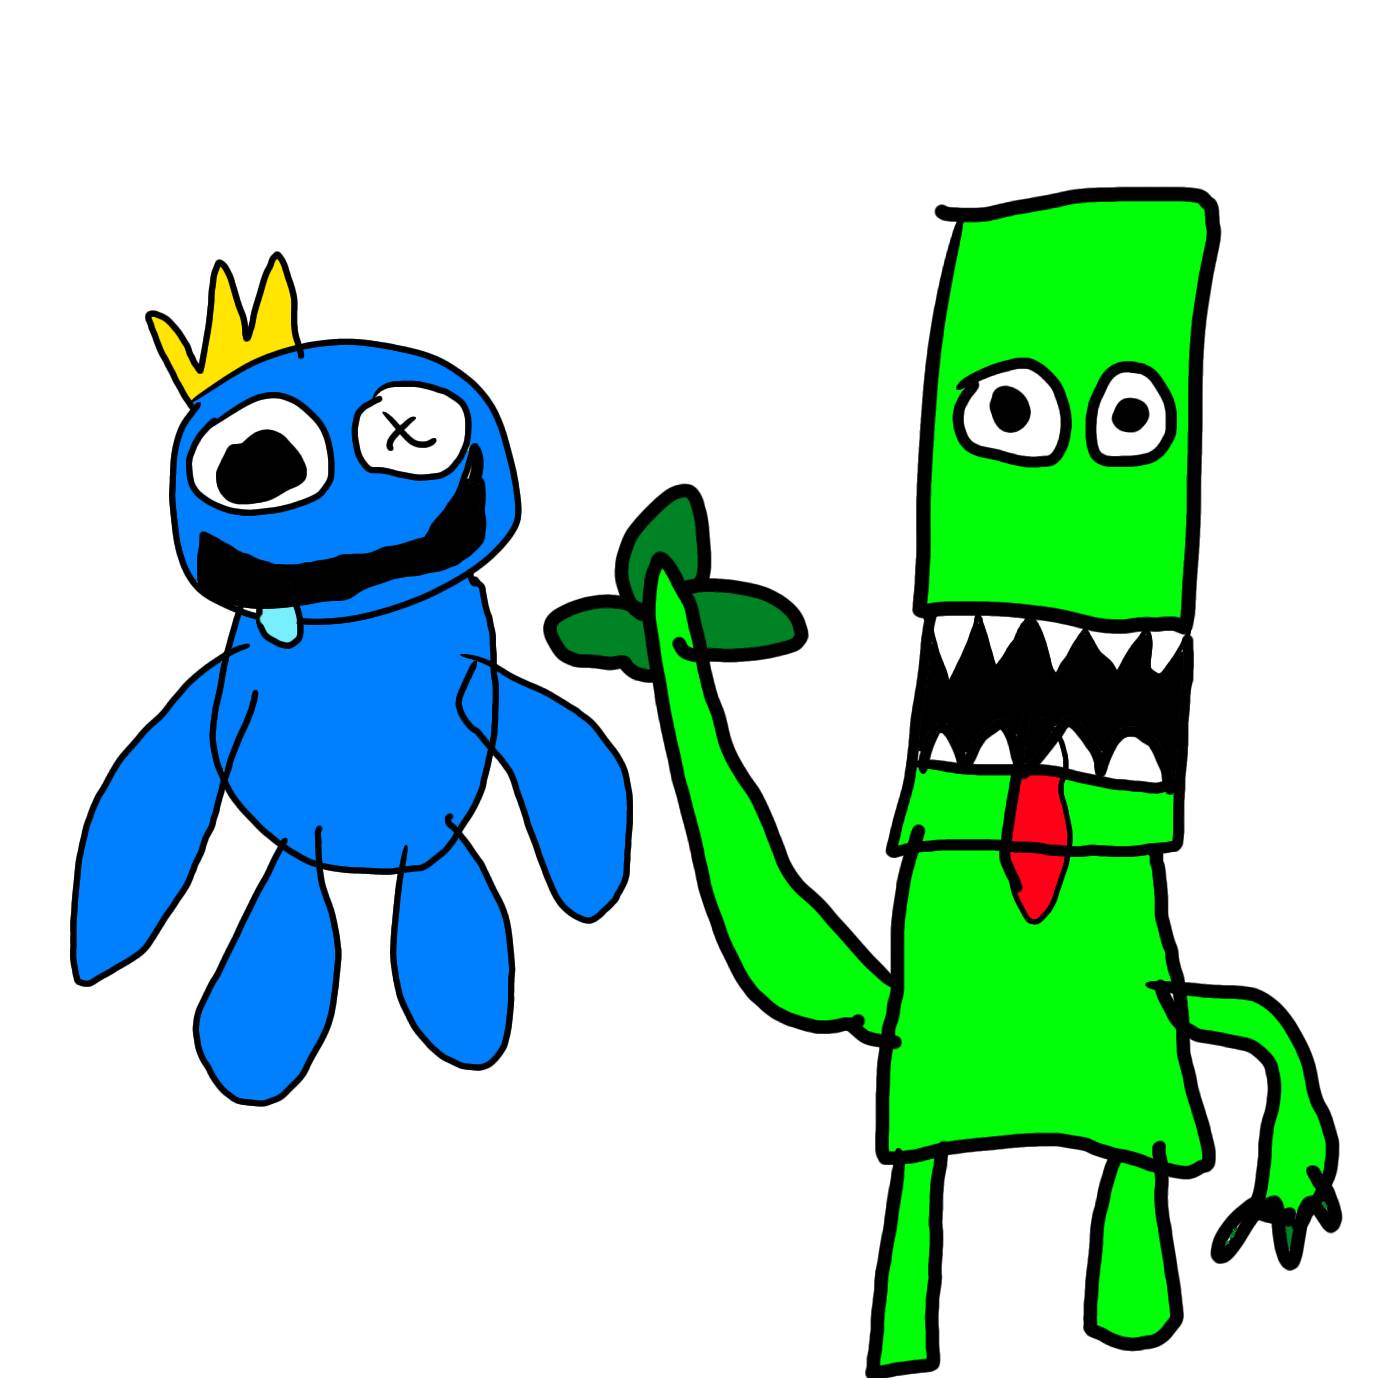 Blue, green and gold (oc ) rainbow friends by redguy555446 on DeviantArt